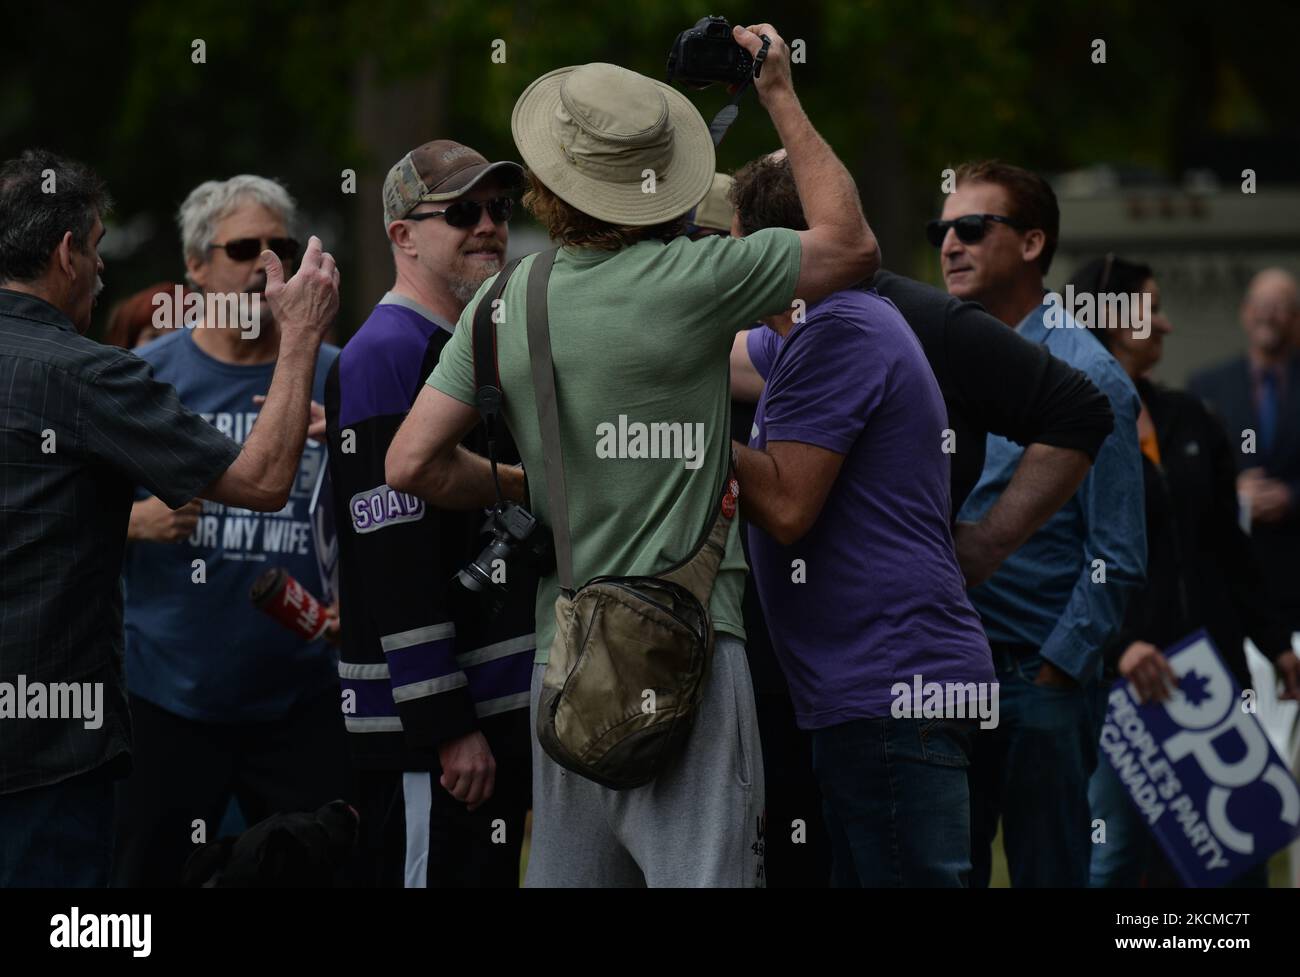 Local supporters of the People's Party of Canada seen in front of a counter-protester who is filming with his mobile phone during Maxime Bernier's address at an election rally in Borden Park, Edmonton, AB. On Saturday, 11 September 2021, in Edmonton, Alberta, Canada. (Photo by Artur Widak/NurPhoto) Stock Photo